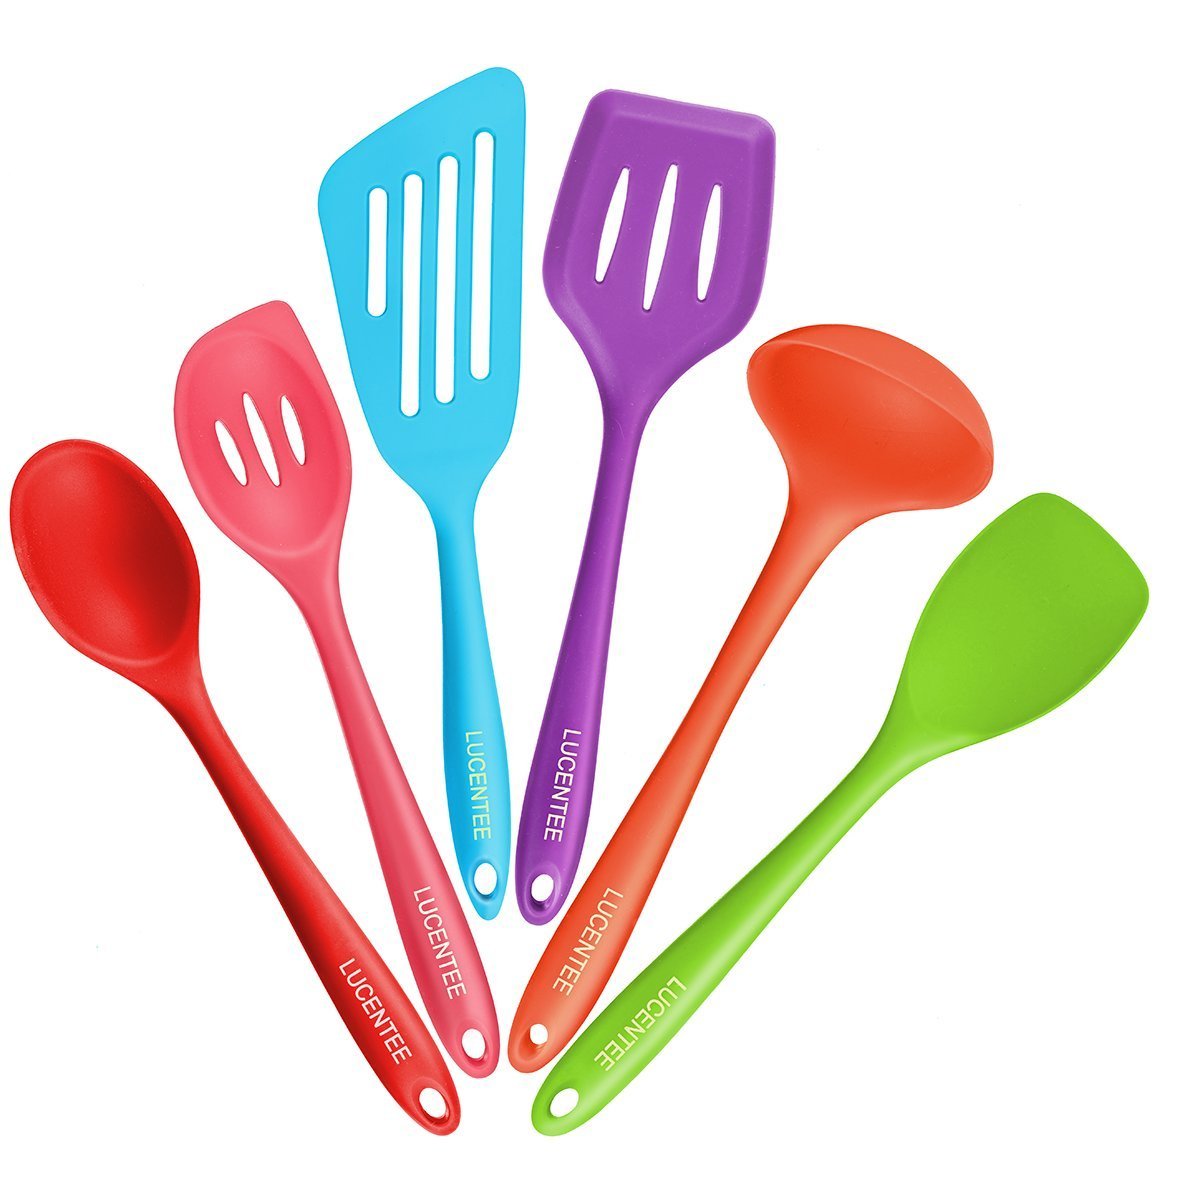 Lucentee 6-Piece Silicone Cooking Set, $24.99